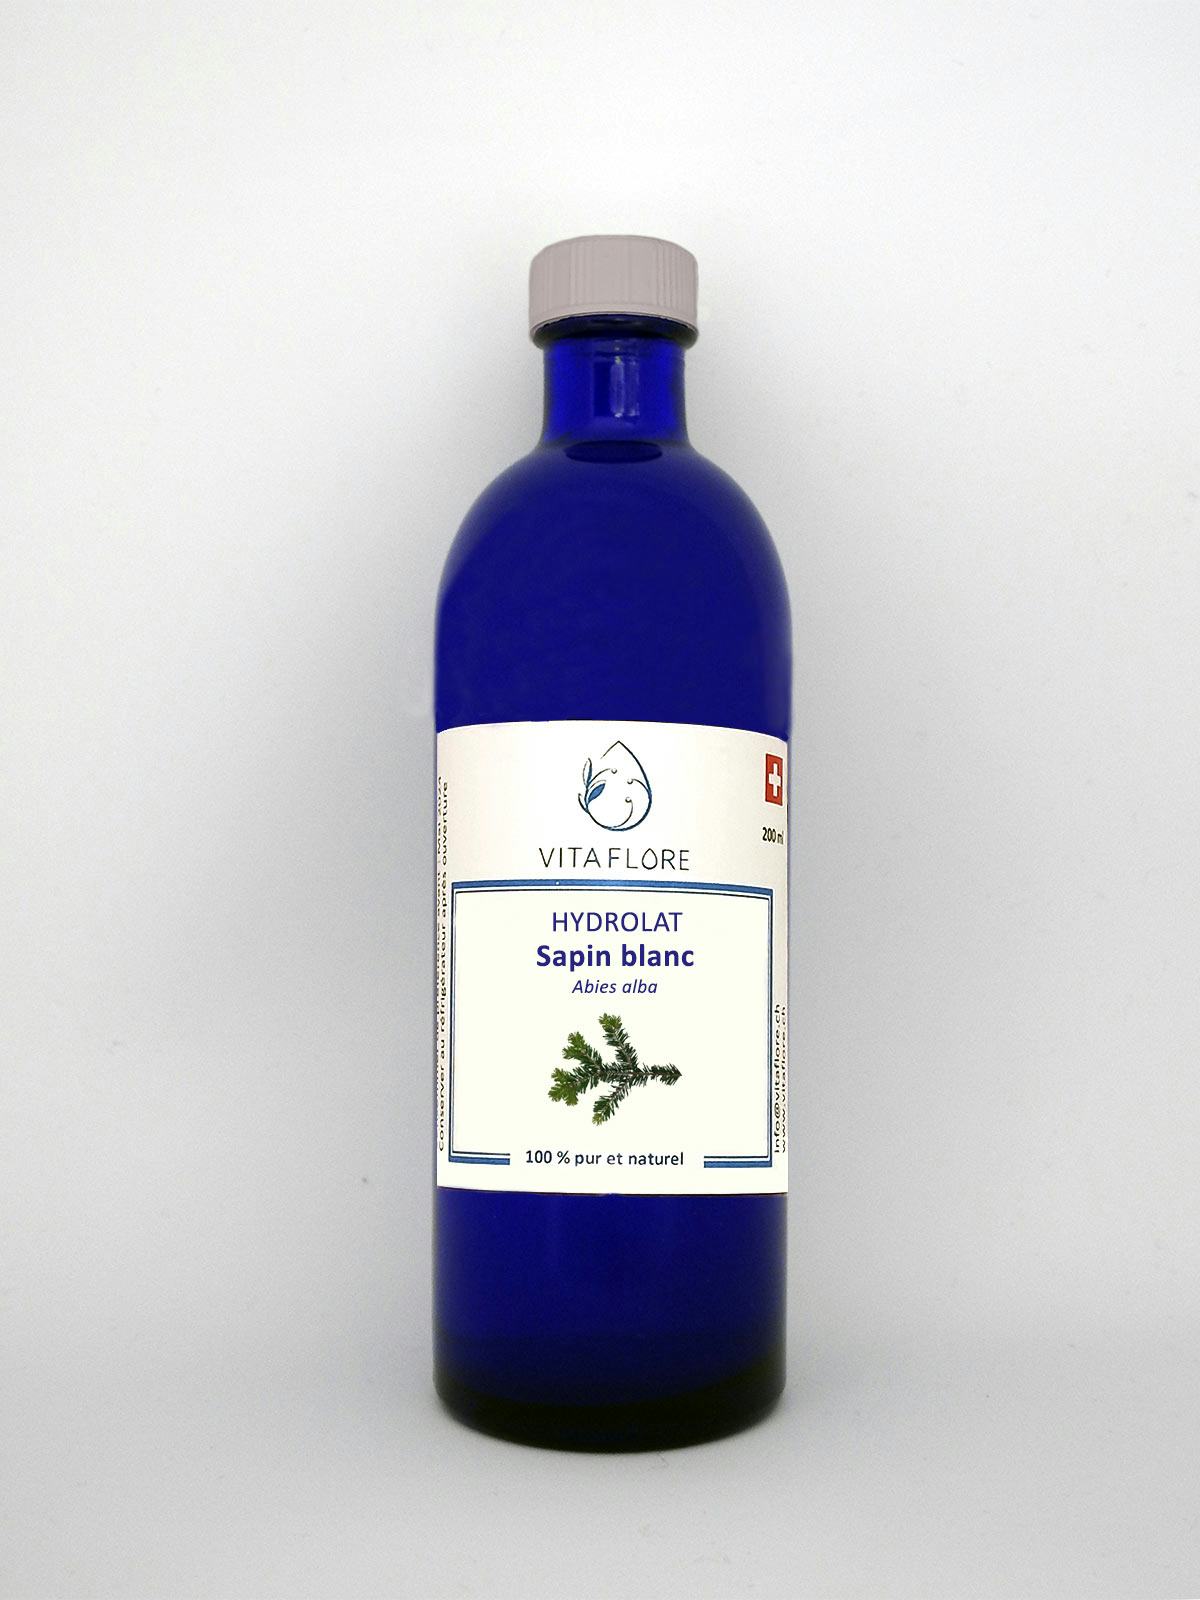 Hydrolat Sapin blanc, artisanal product for direct sale in Switzerland